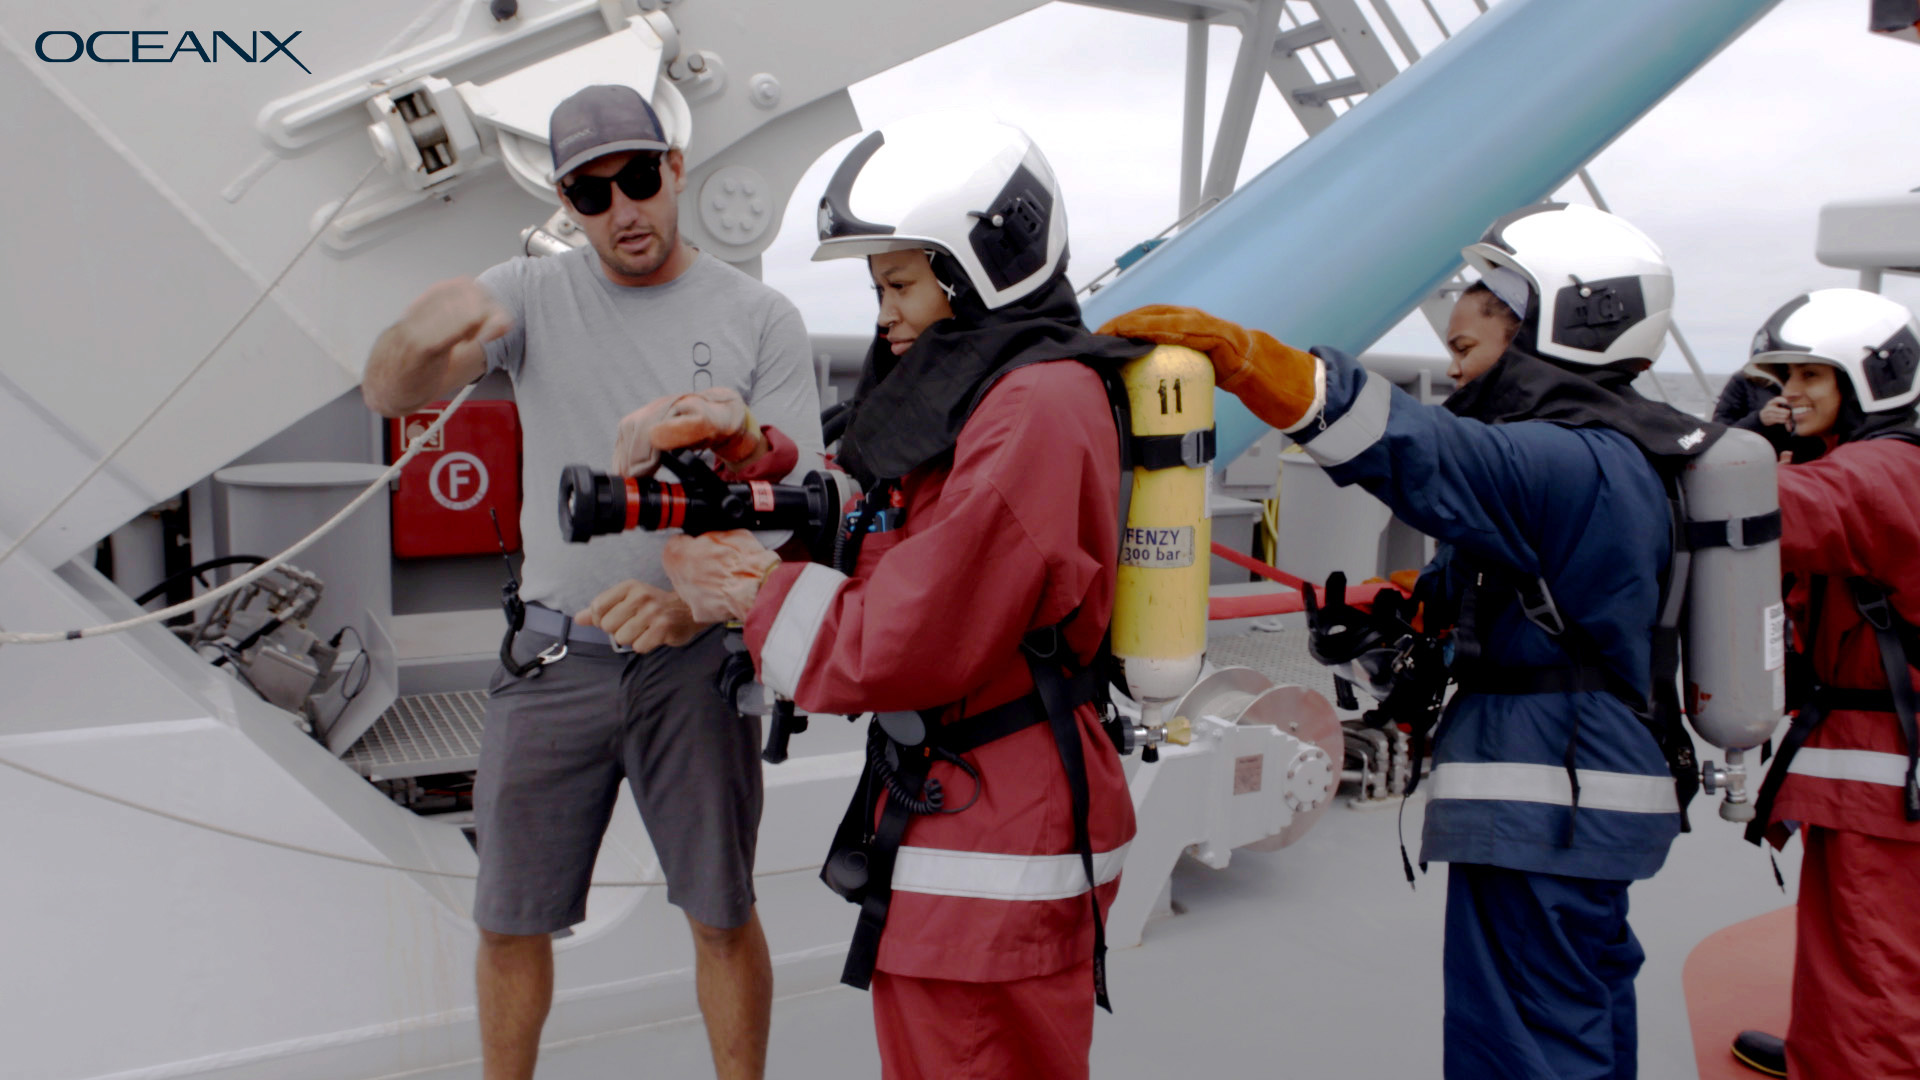 Students are seen manning equipment on the deck of OceanXplorer.